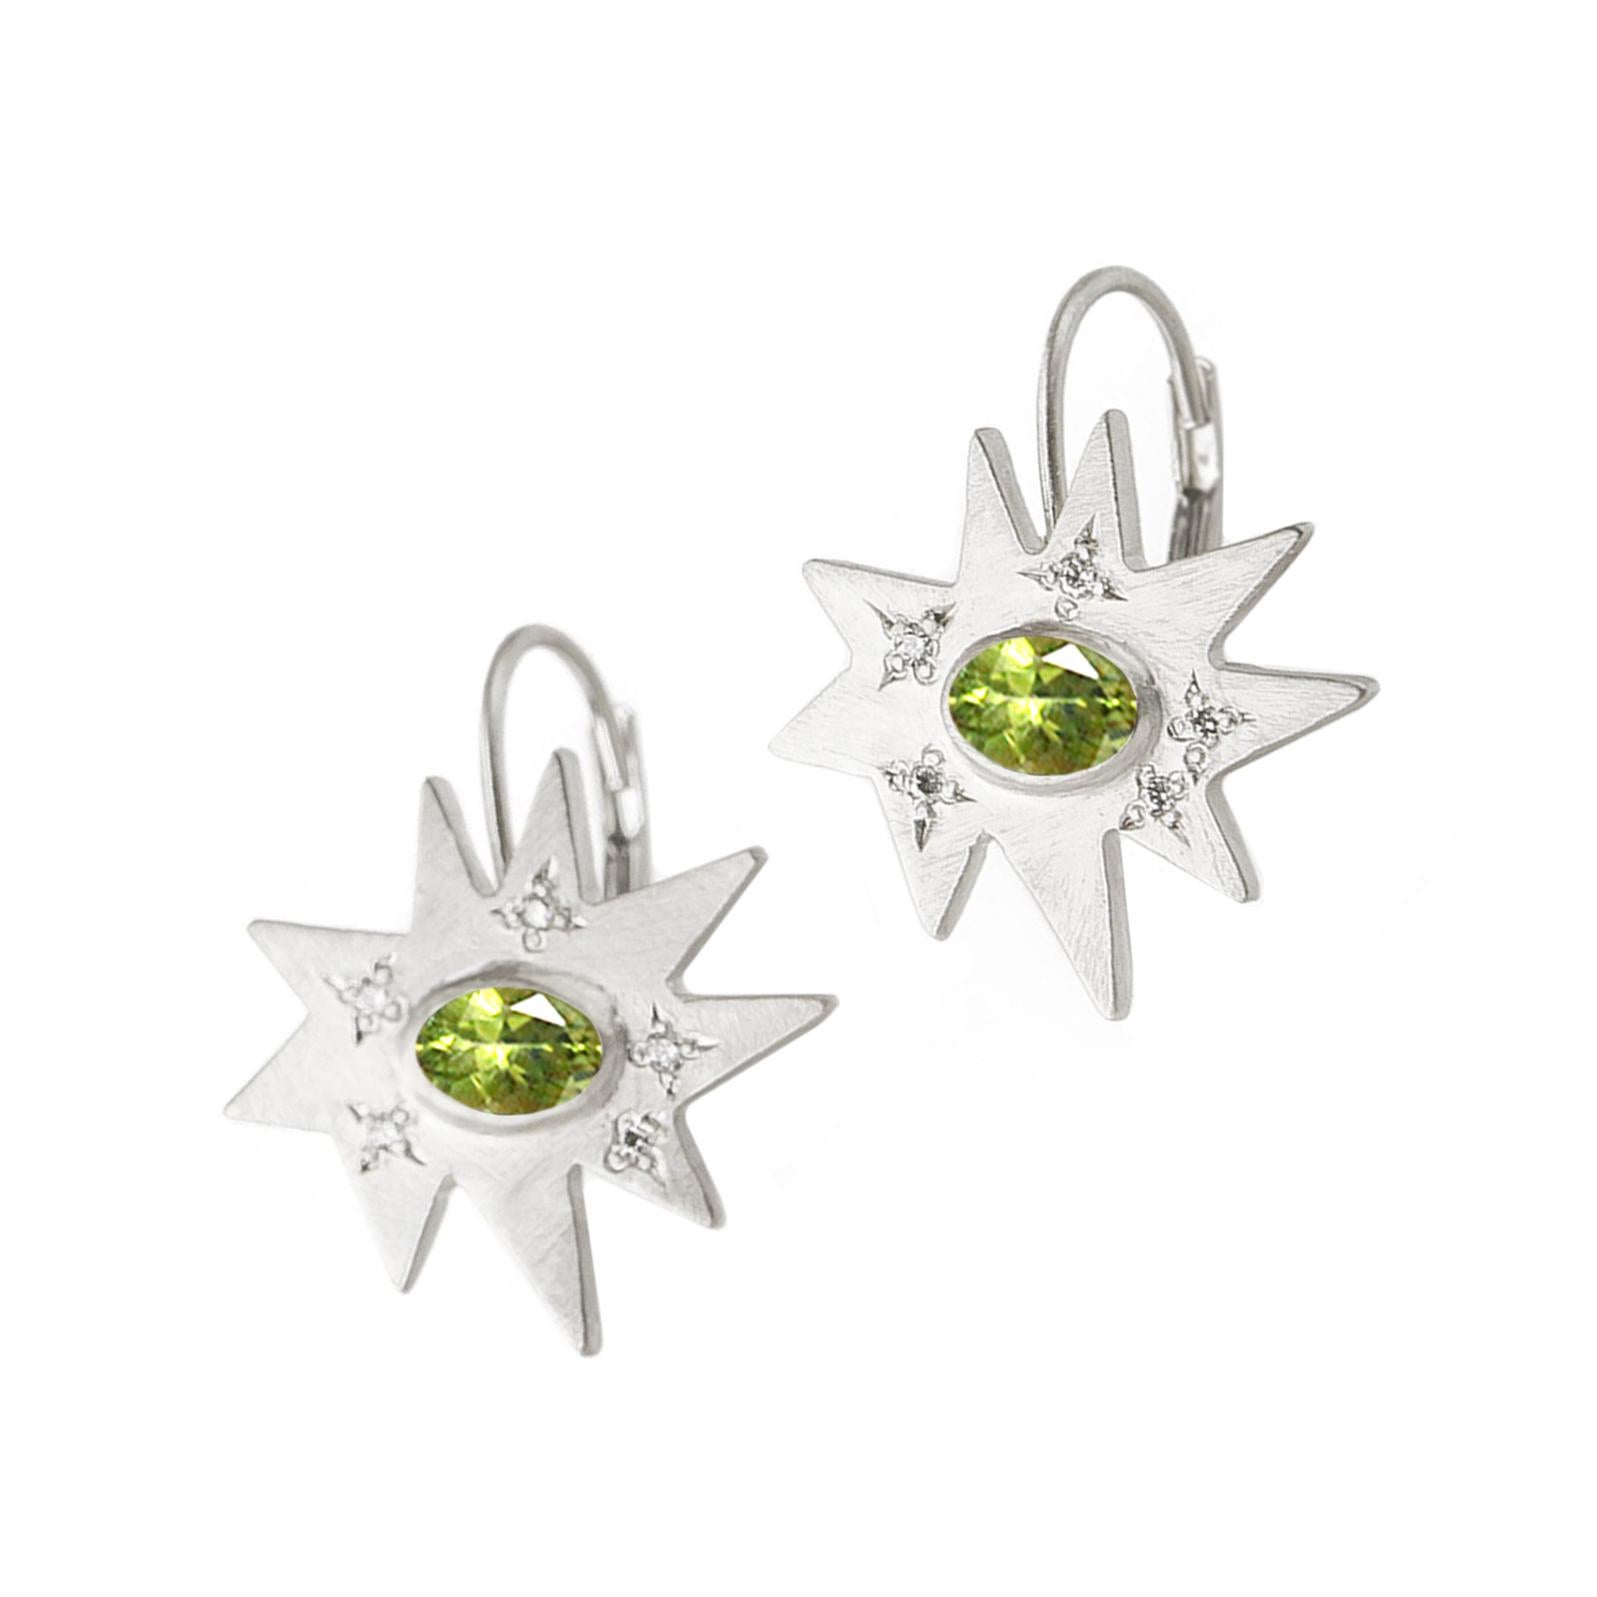 The perfect drop for any occasion. Our iconic matte sterling silver Stellina star is fixed to a lever back hook. Featuring our signature diamond dusting and a vibrant peridot center, this pair is full of sparkle and color.
 
Matte sterling silver,